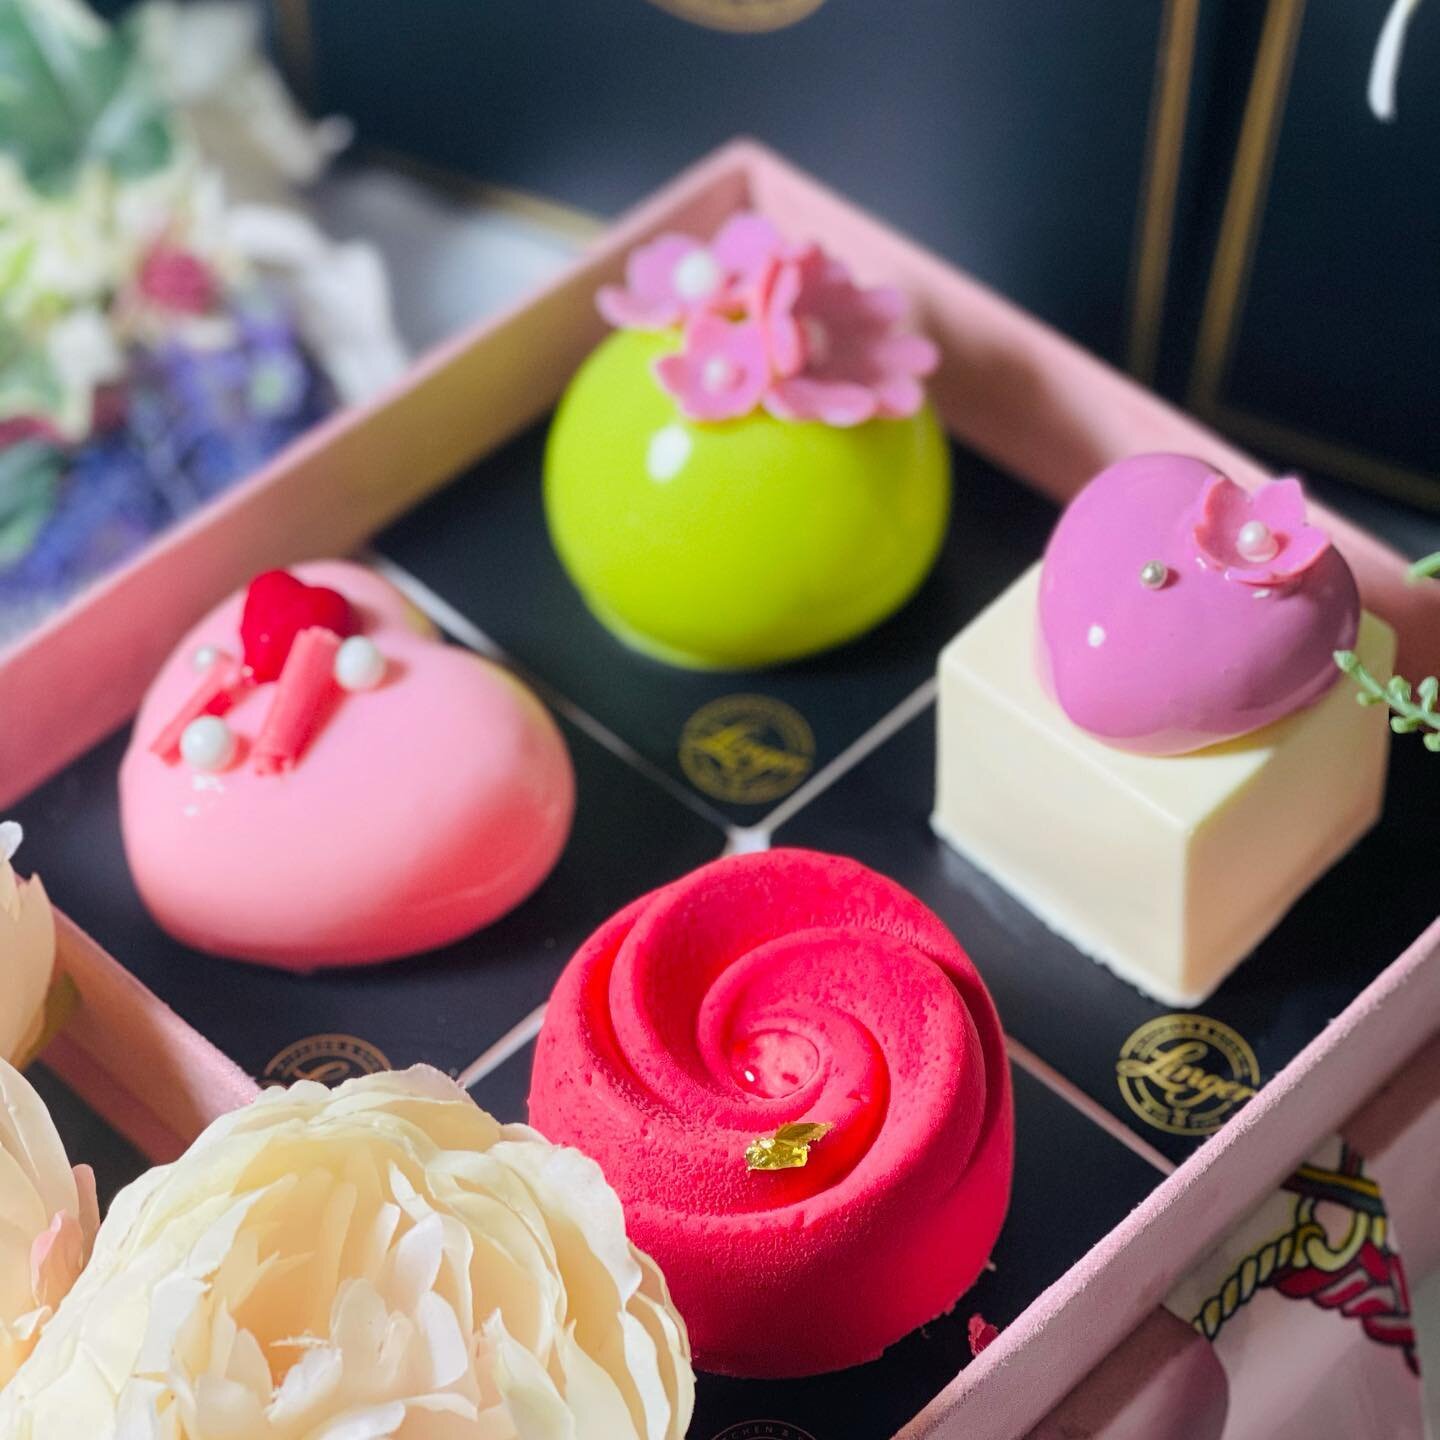 Get your Mother&rsquo;s Day sweet! 
Now you can order linger&rsquo;s special Mother&rsquo;s Day gift box from our website 

https://linger.melbourne/order-cakes

Limit stock be quick. 
Dine in at linger on Mother&rsquo;s Day will receive our surprise